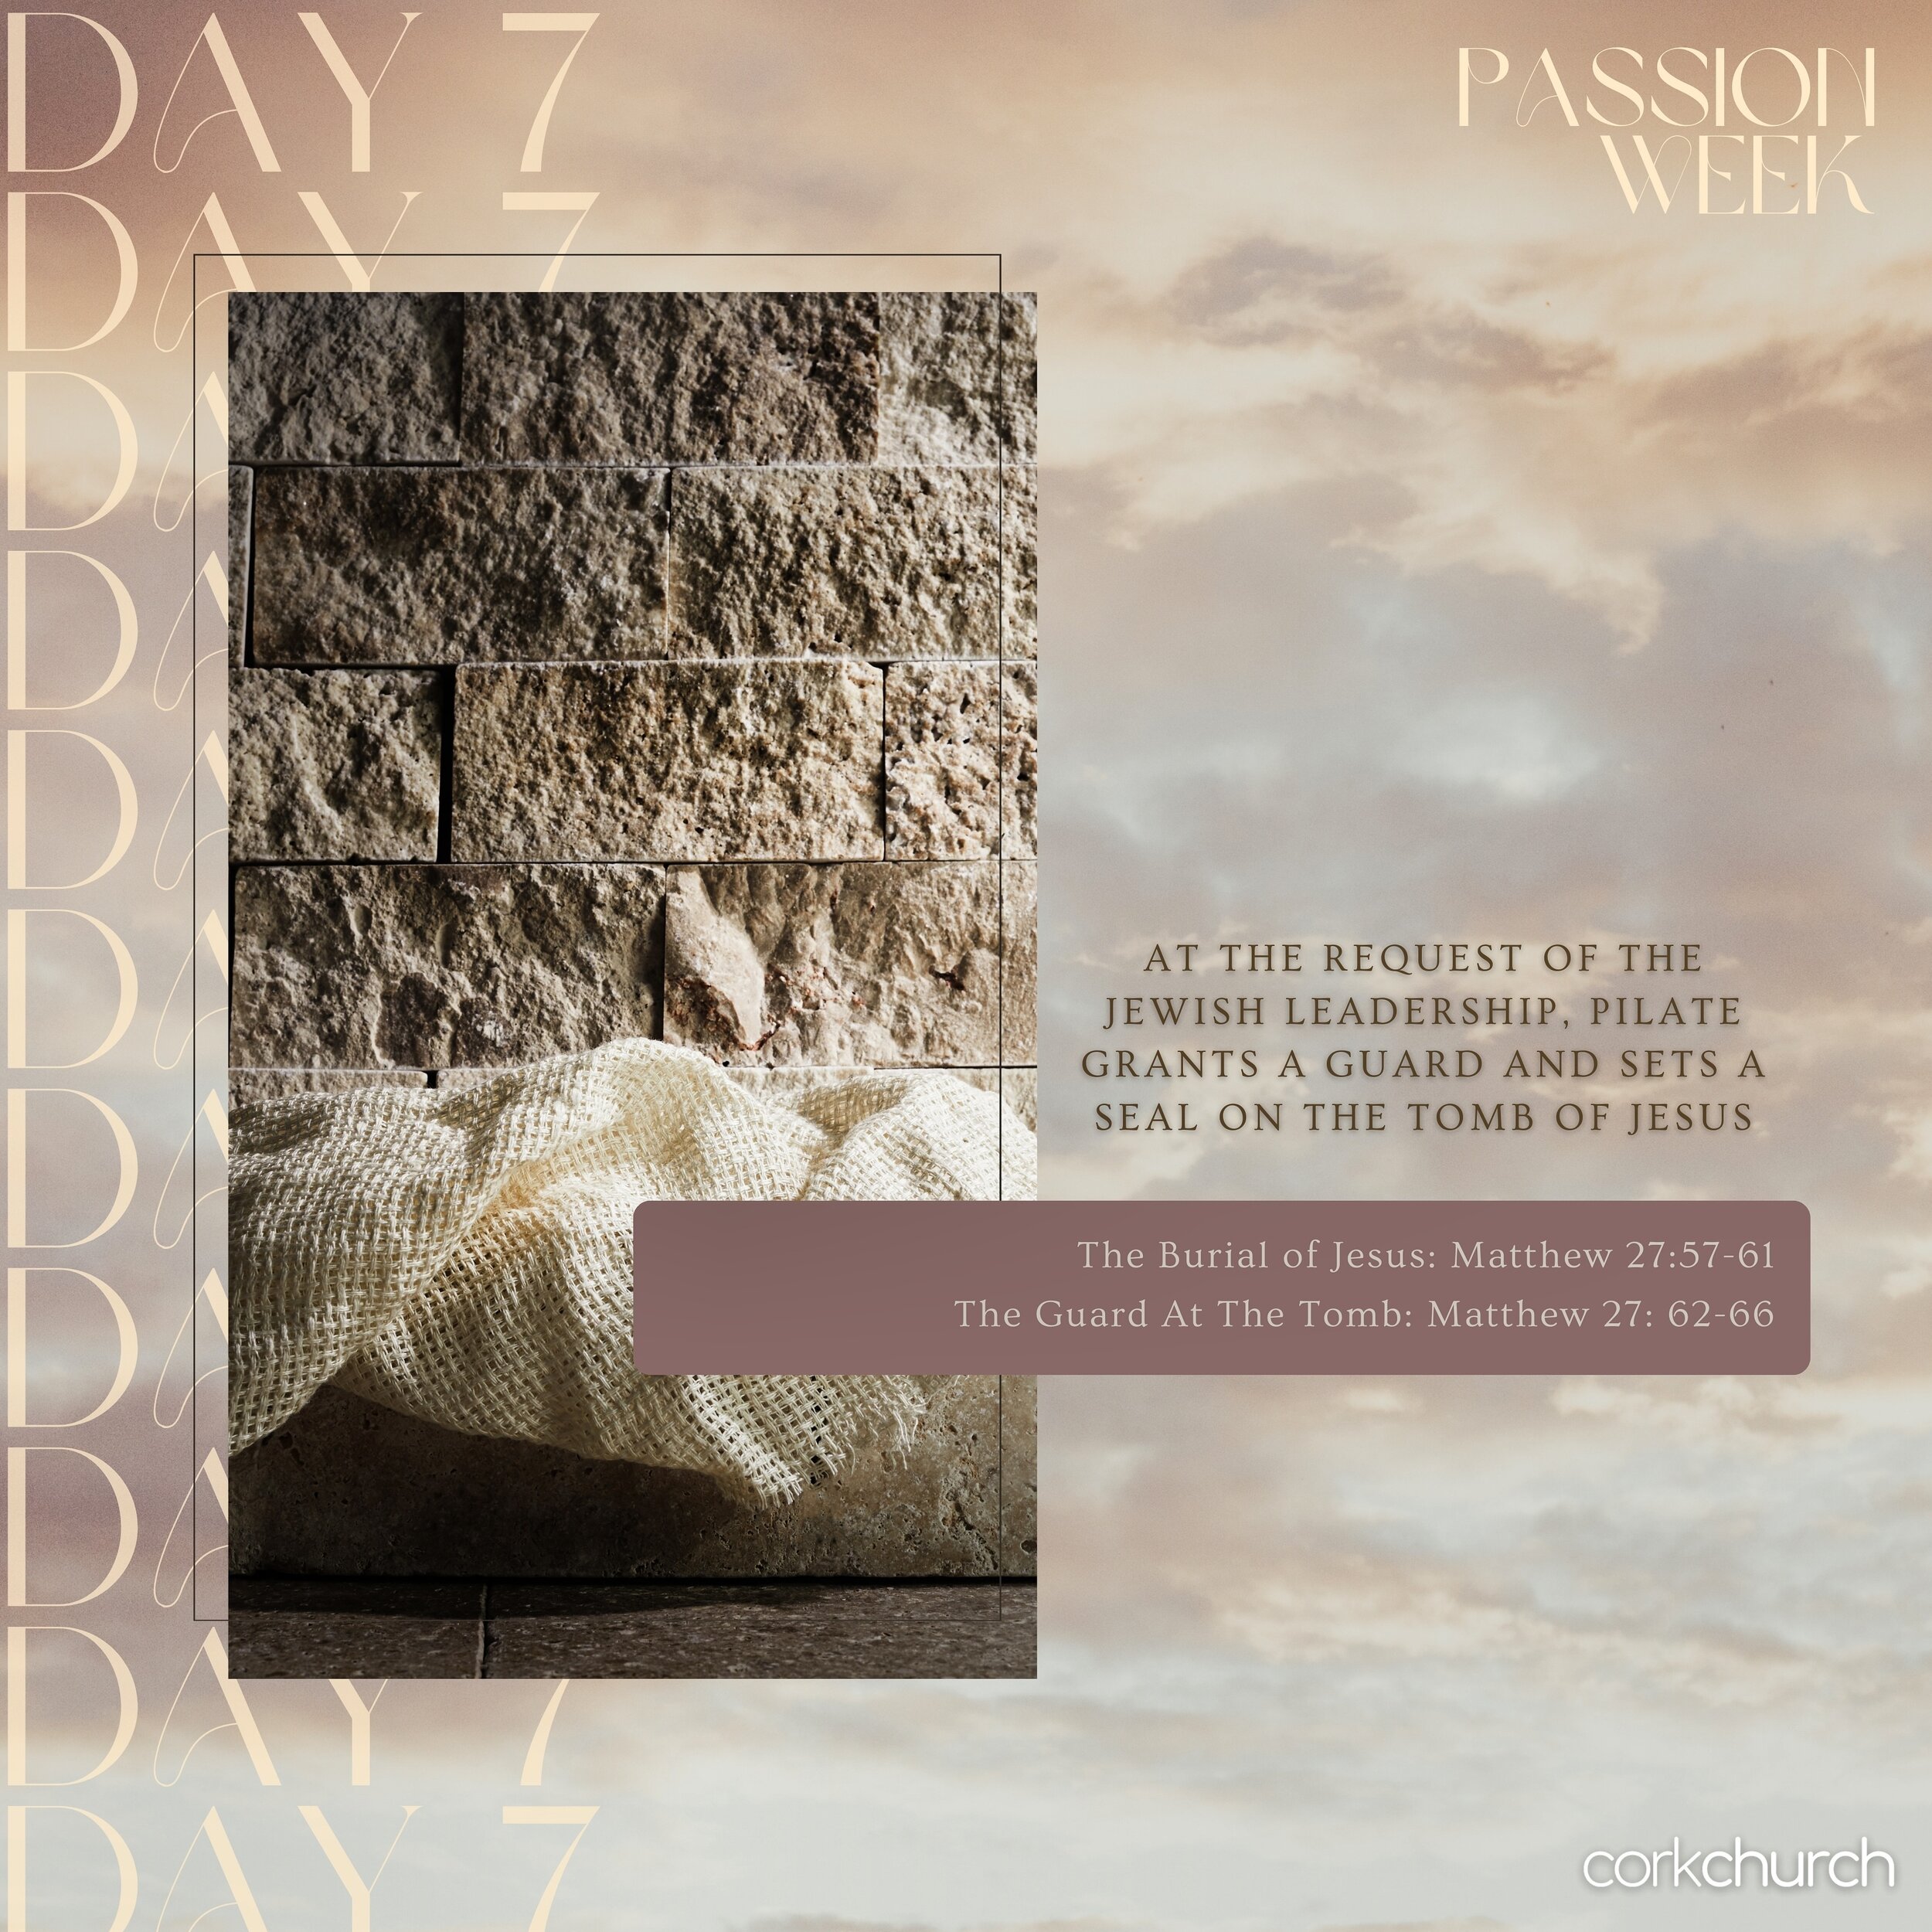 PASSION WEEK: DAY 7

Despite today&rsquo;s silence, yesterday the earth rumbled, quaked, shook and the sky grew dark. God made Himself heard on Friday as He sacrificed His one and only Son to save us all. God tore the veil in the temple from top to b